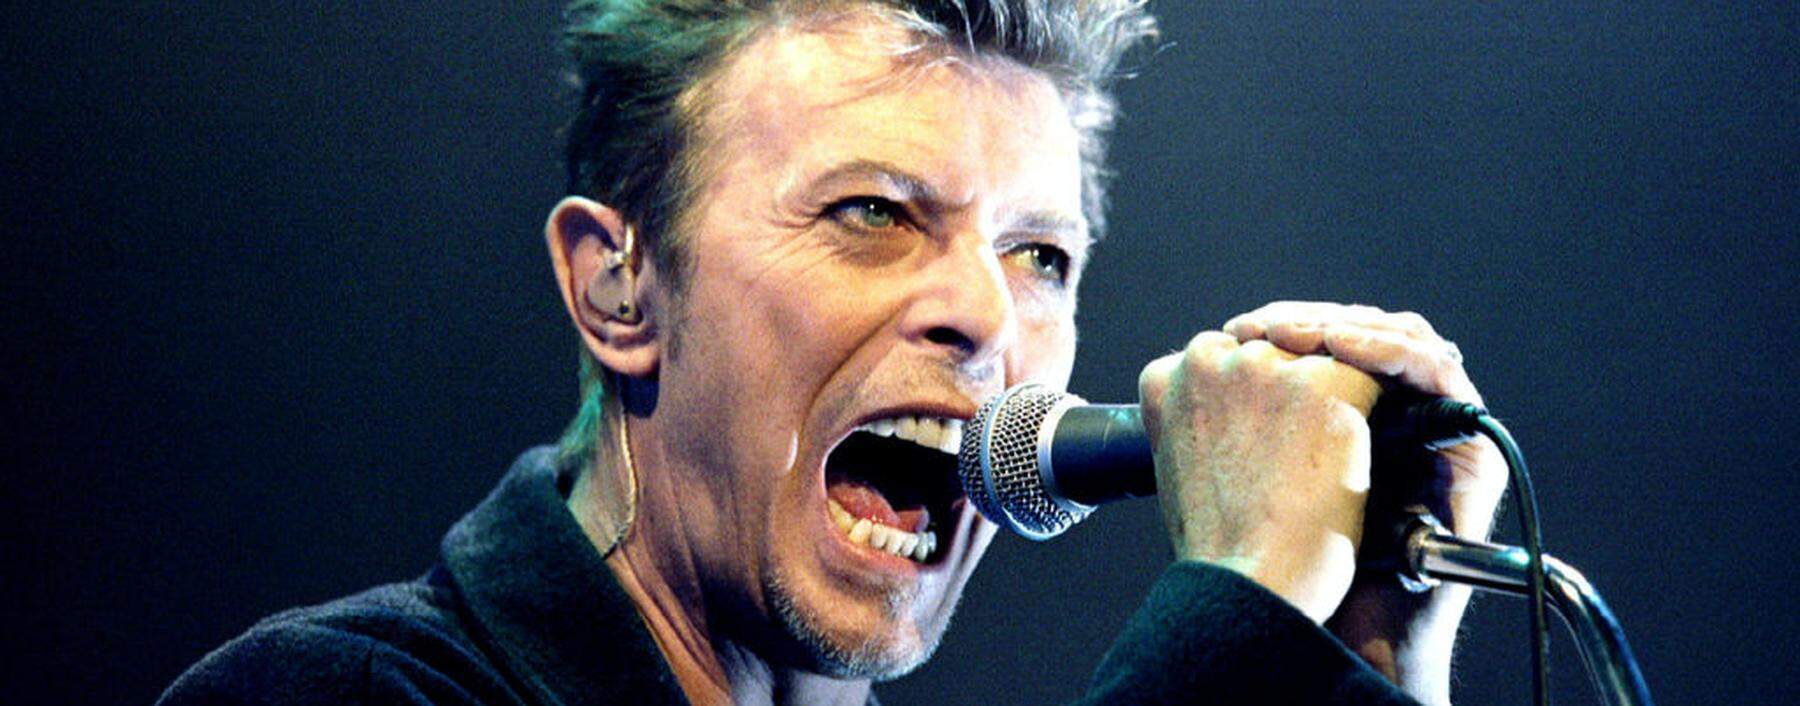 File photo of David Bowie performing during a concert in Vienna